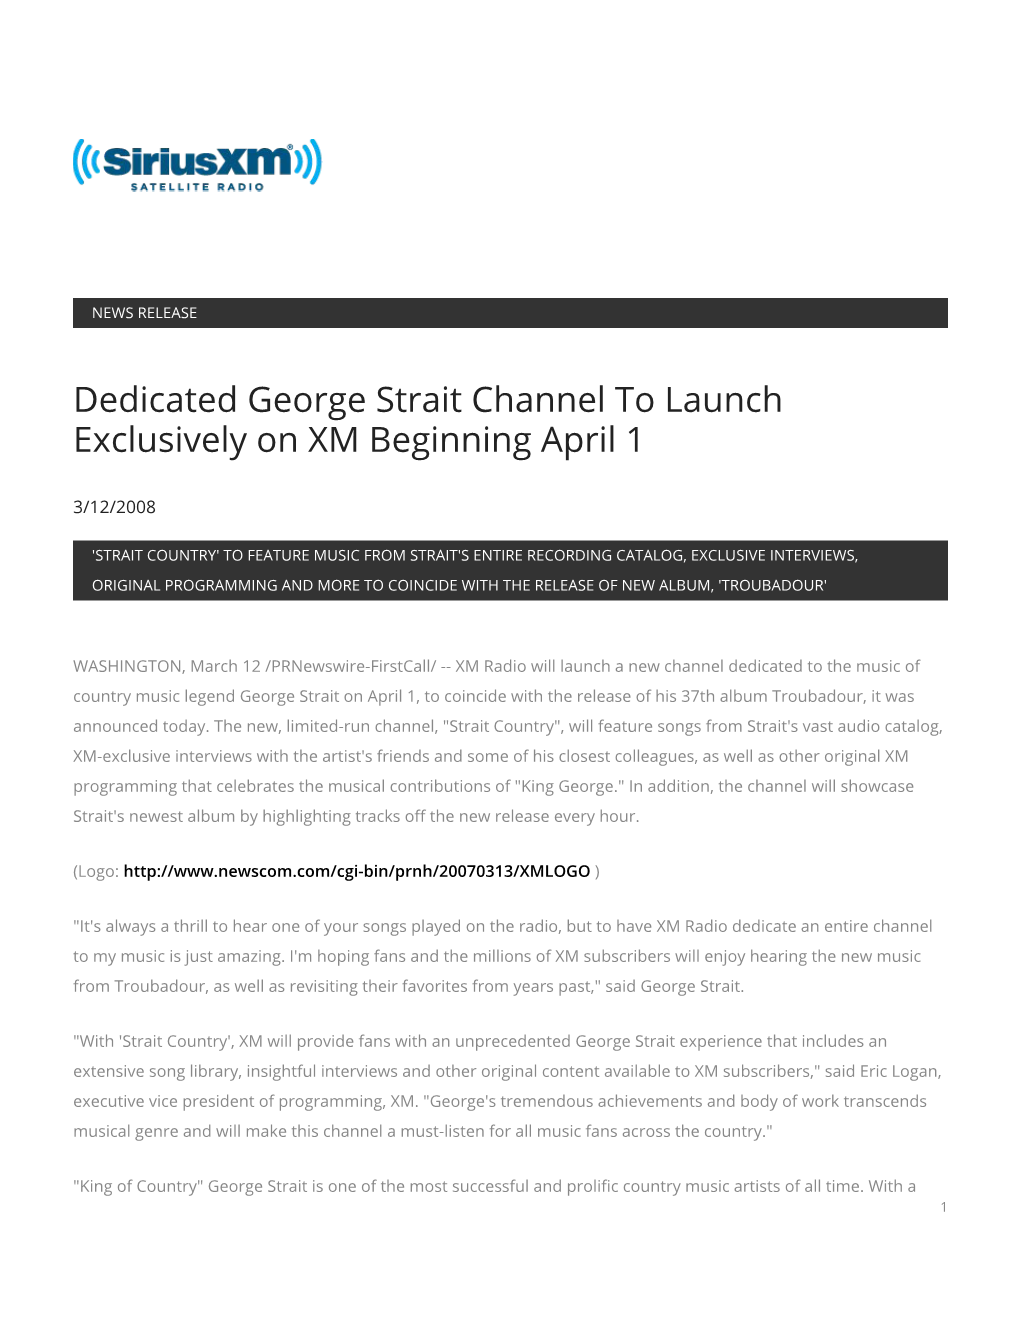 Dedicated George Strait Channel to Launch Exclusively on XM Beginning April 1